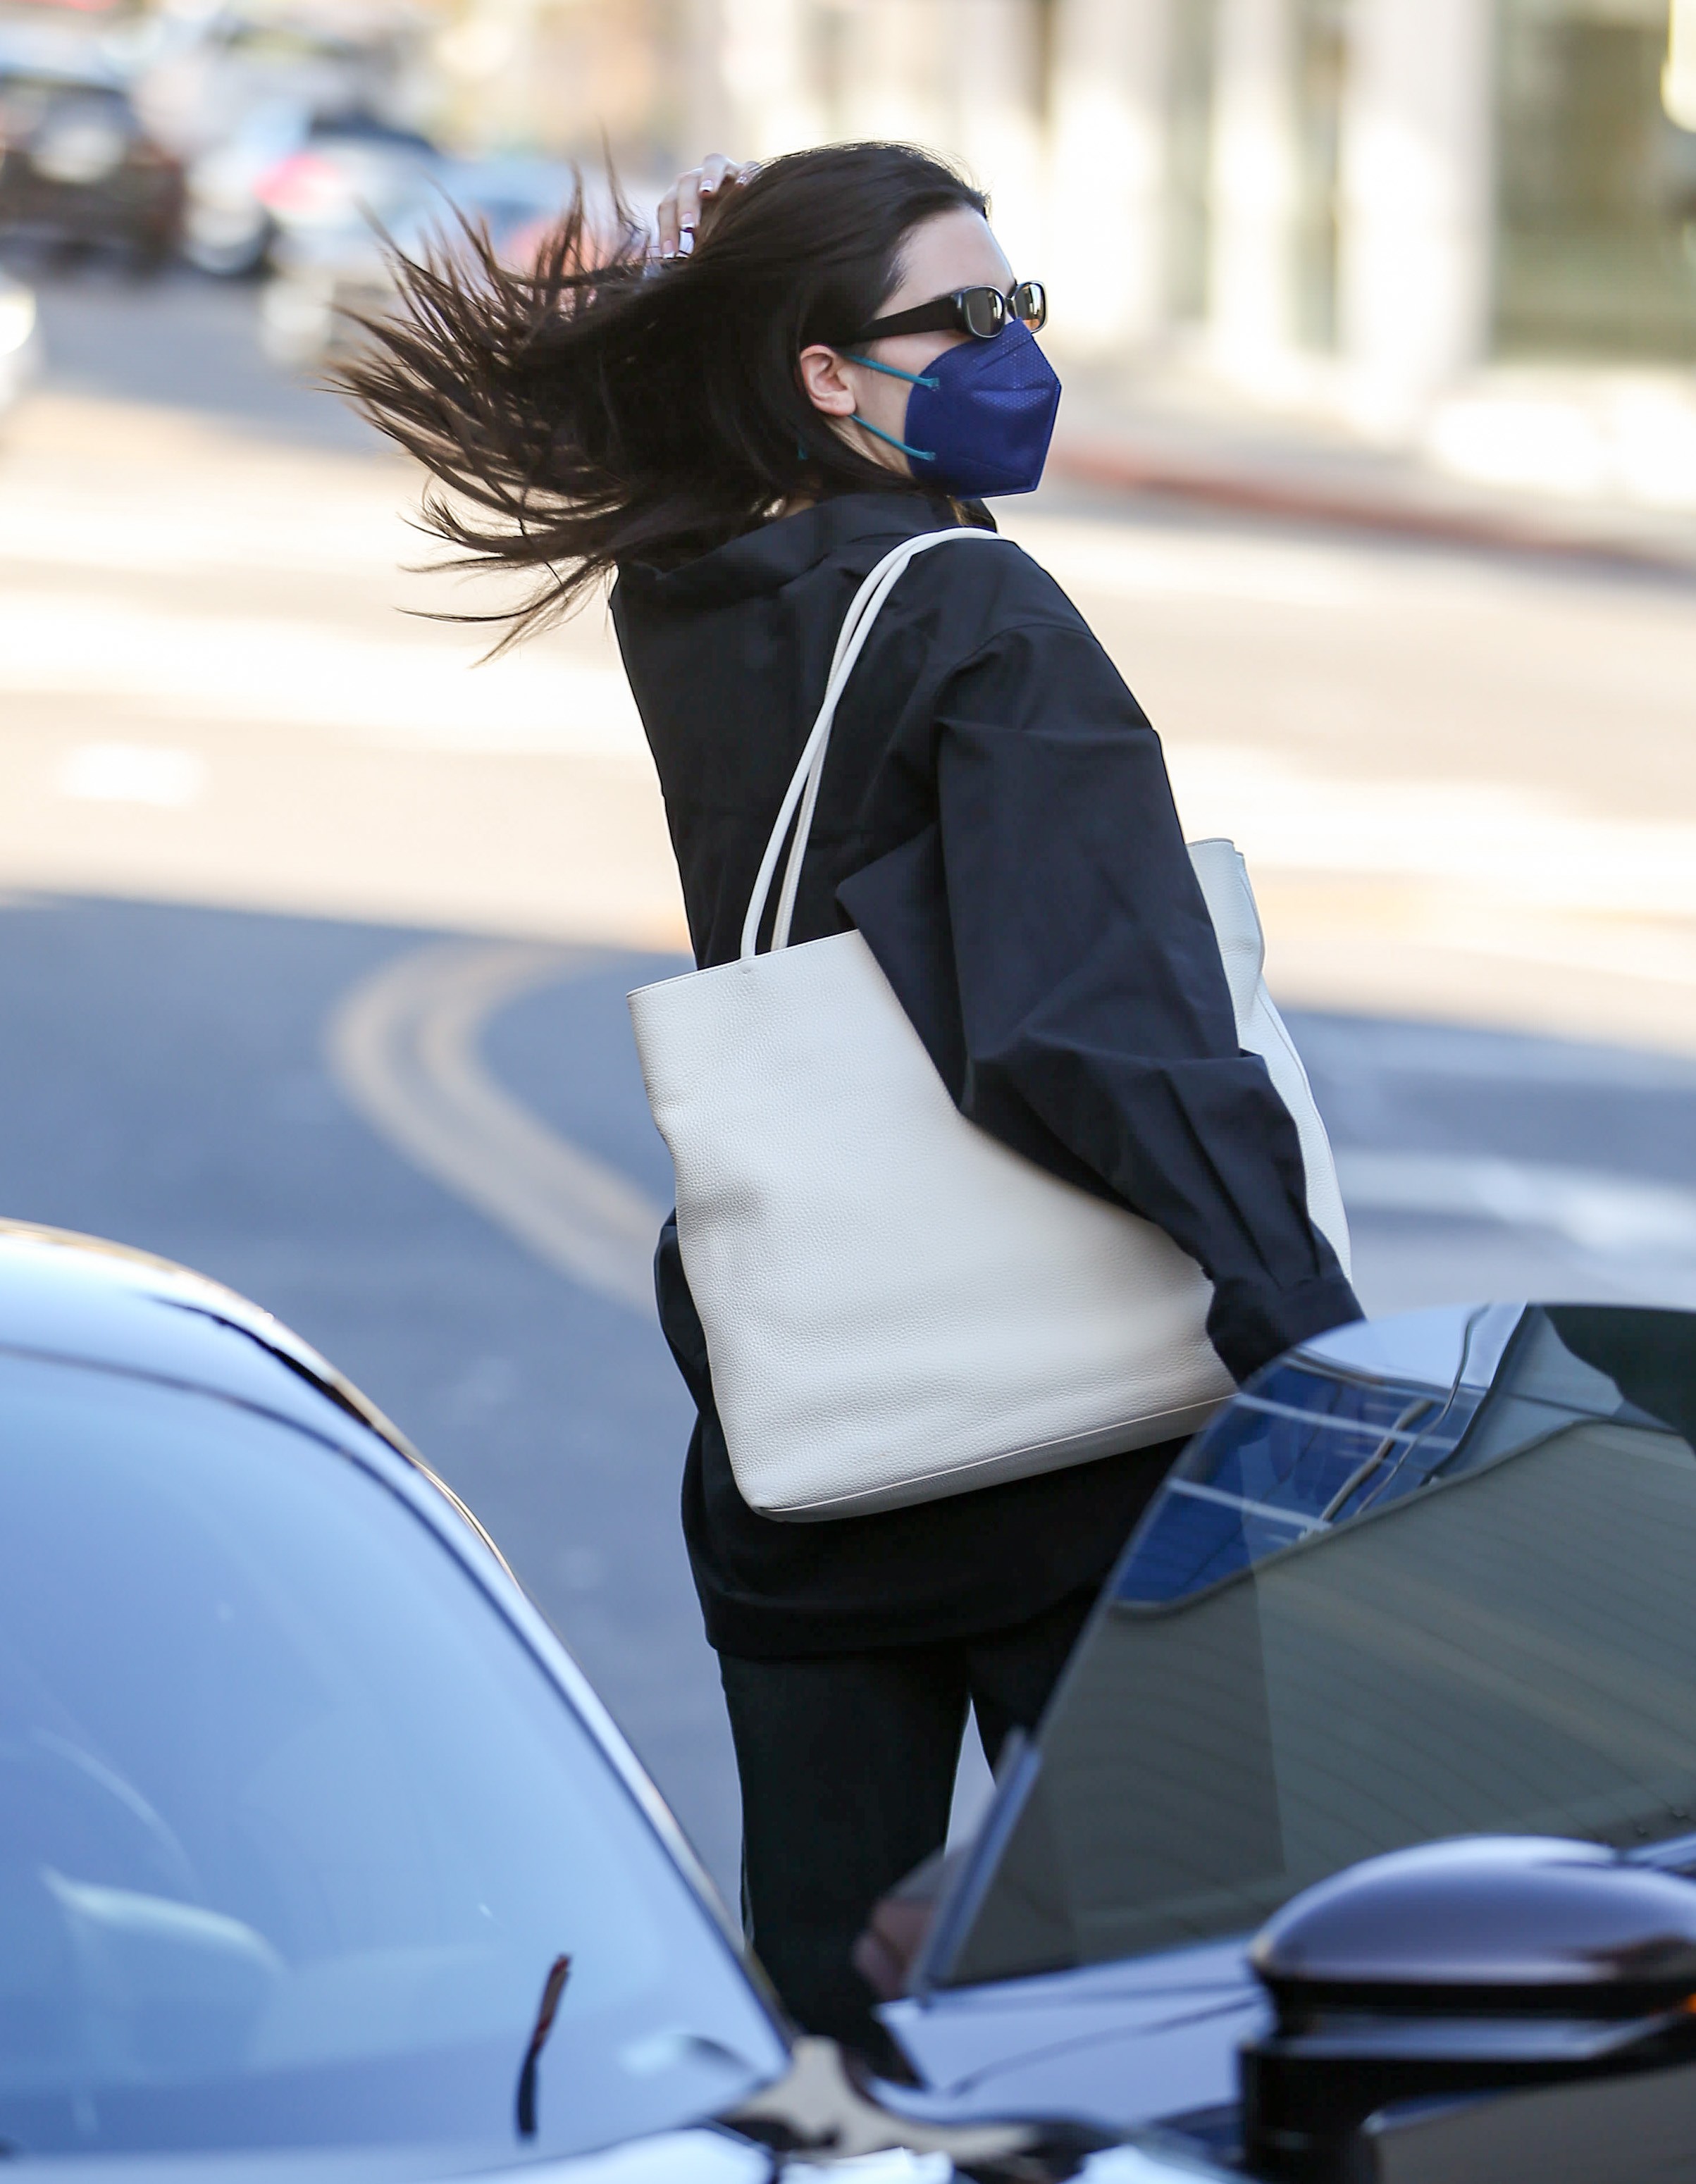 LOS ANGELES, CA - FEBRUARY 02: Kendall Jenner is seen on February 02, 2022 in Los Angeles, California.  (Photo by Bellocqimages/Bauer-Griffin/GC Images) (Foto: GC Images)